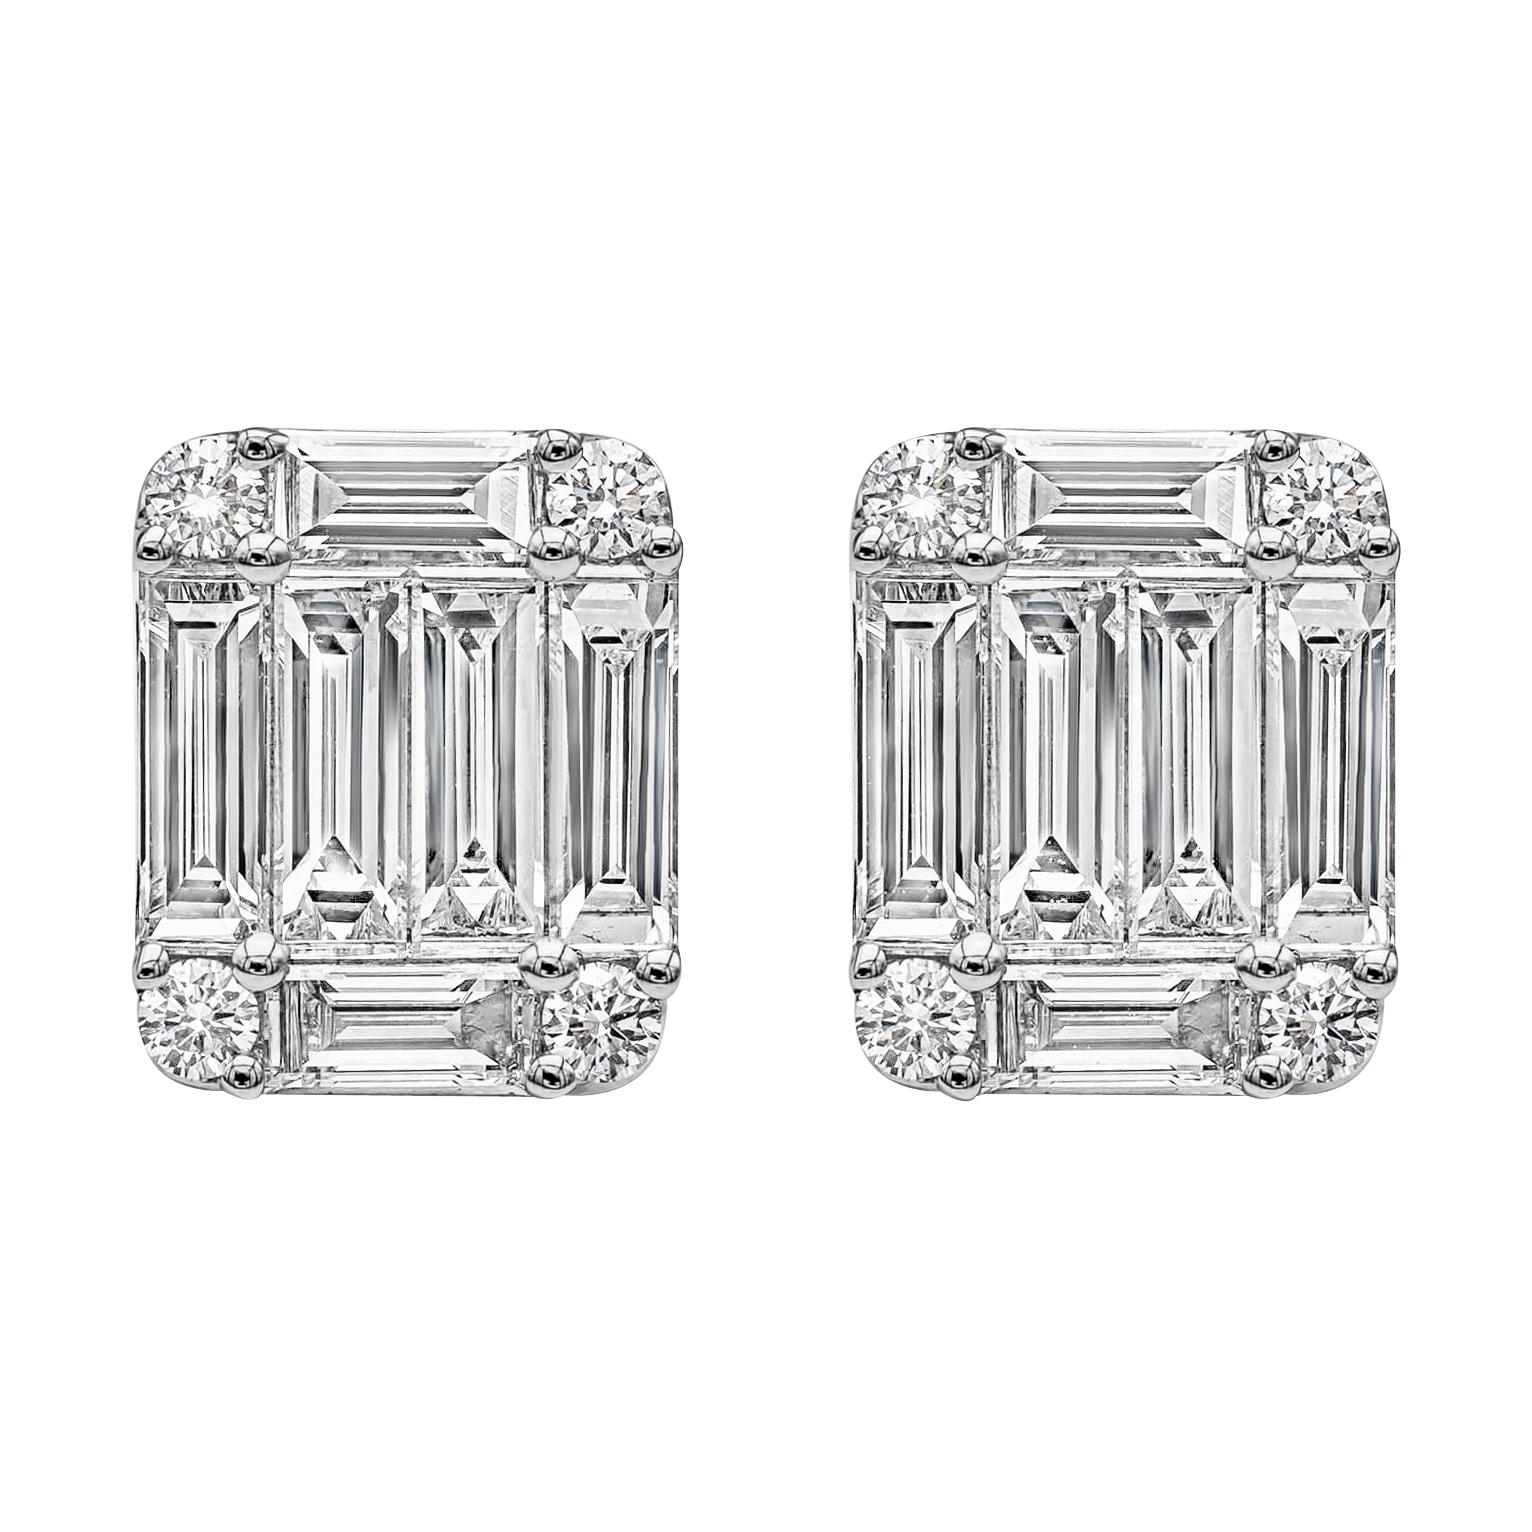 Roman Malakov 1.96 Carats Total Baguette and Round Diamond Cluster Stud Earrings